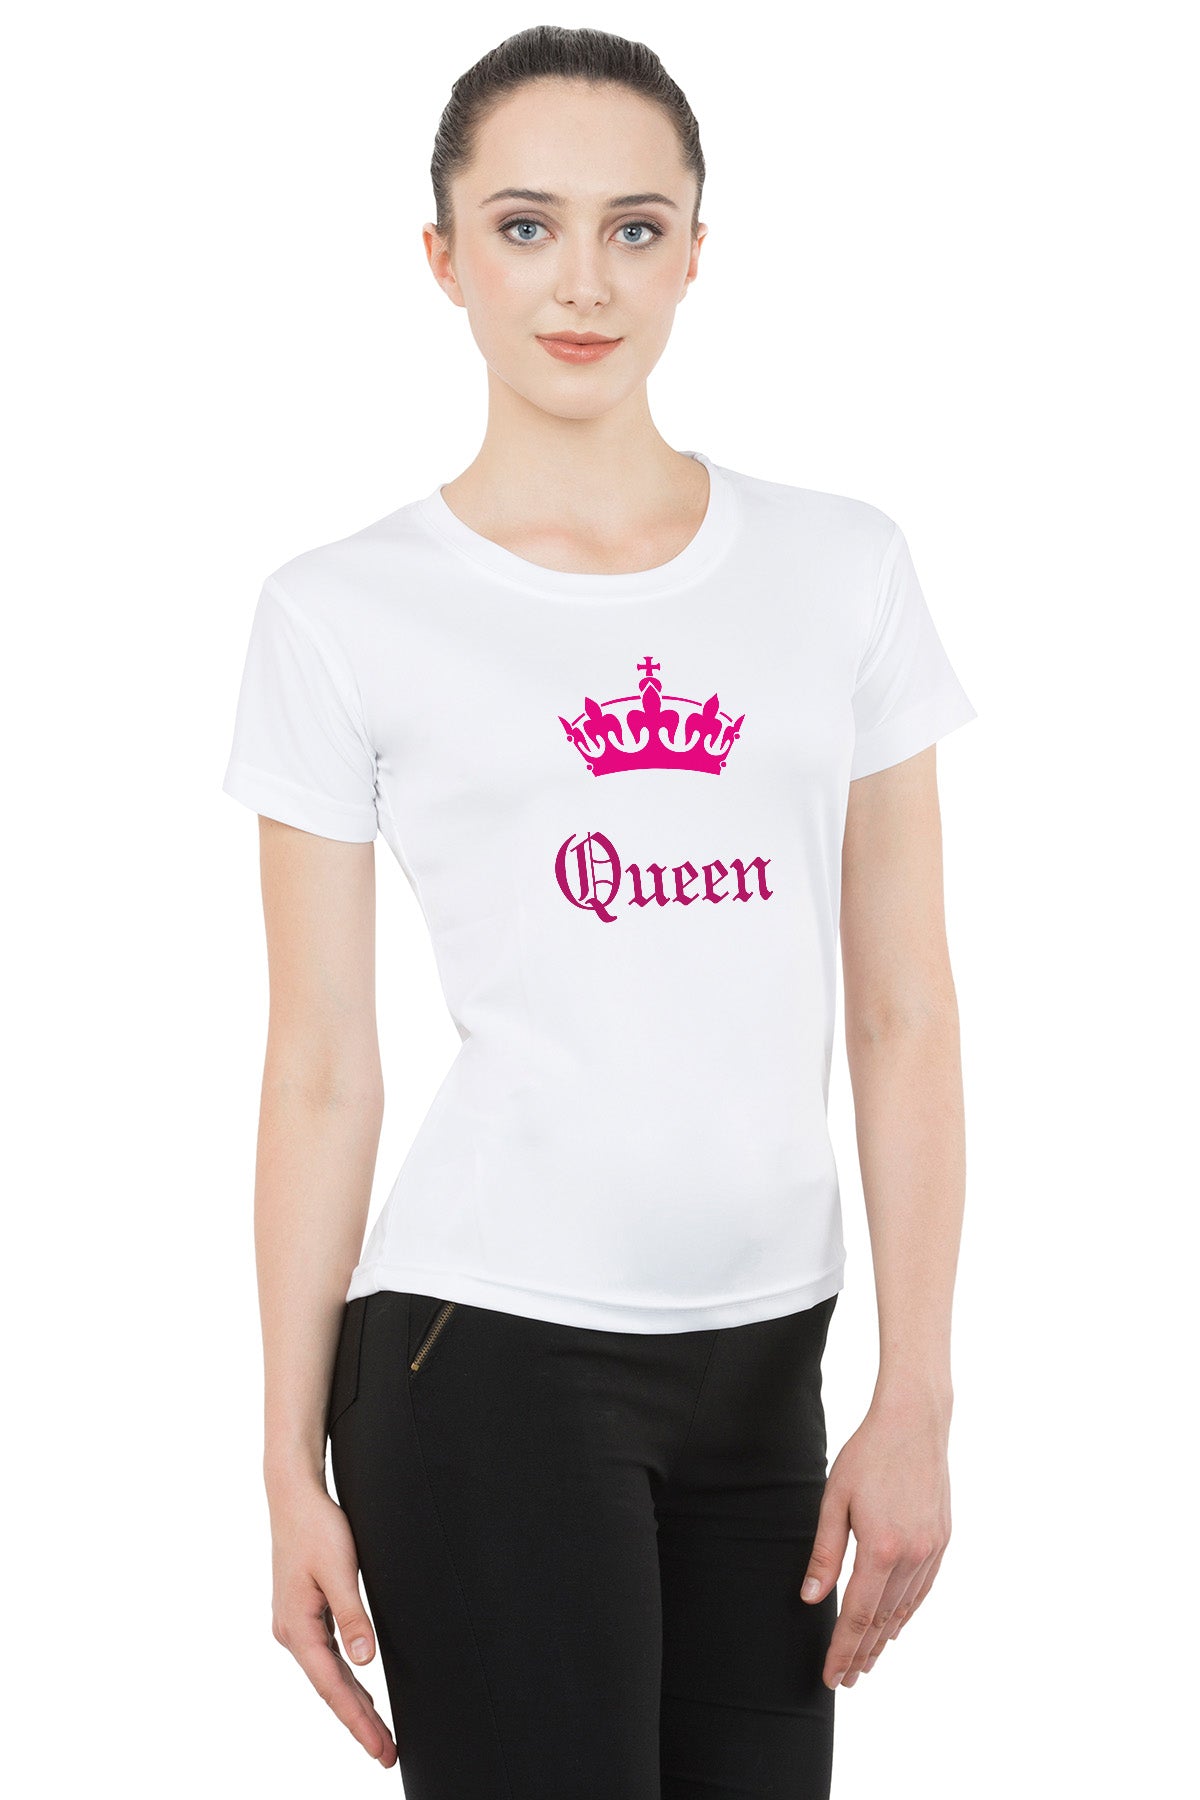 King Queen matching Couple T shirts- White